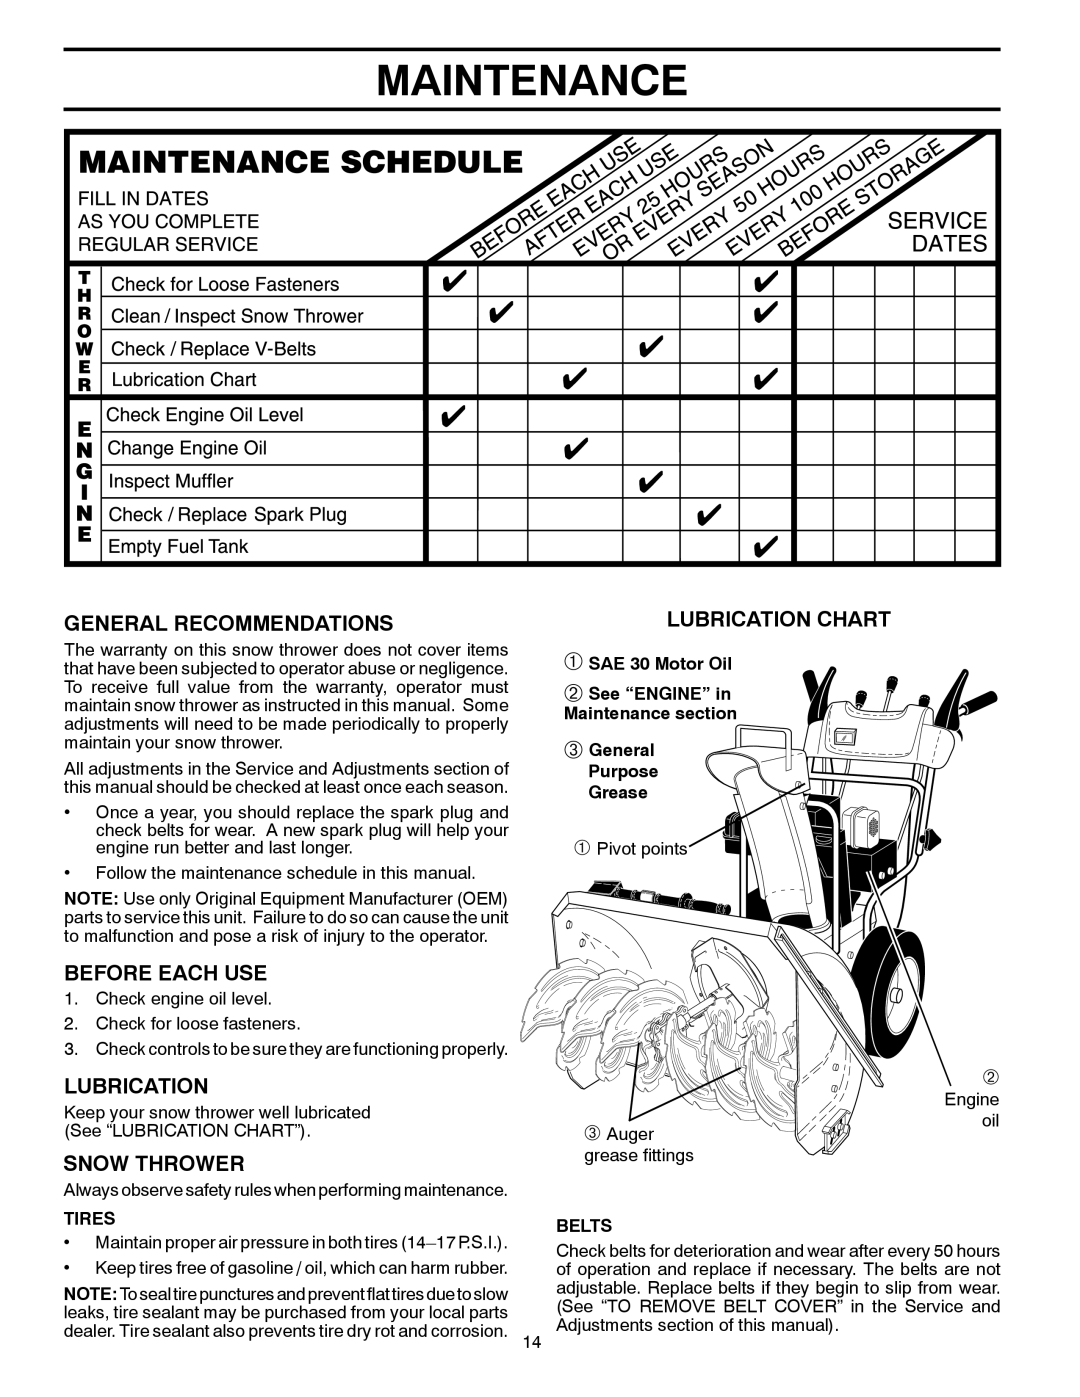 Husqvarna 16530-LS manual Maintenance, General Recommendations, Before Each Use, Snow Thrower, Lubrication Chart, Tires 